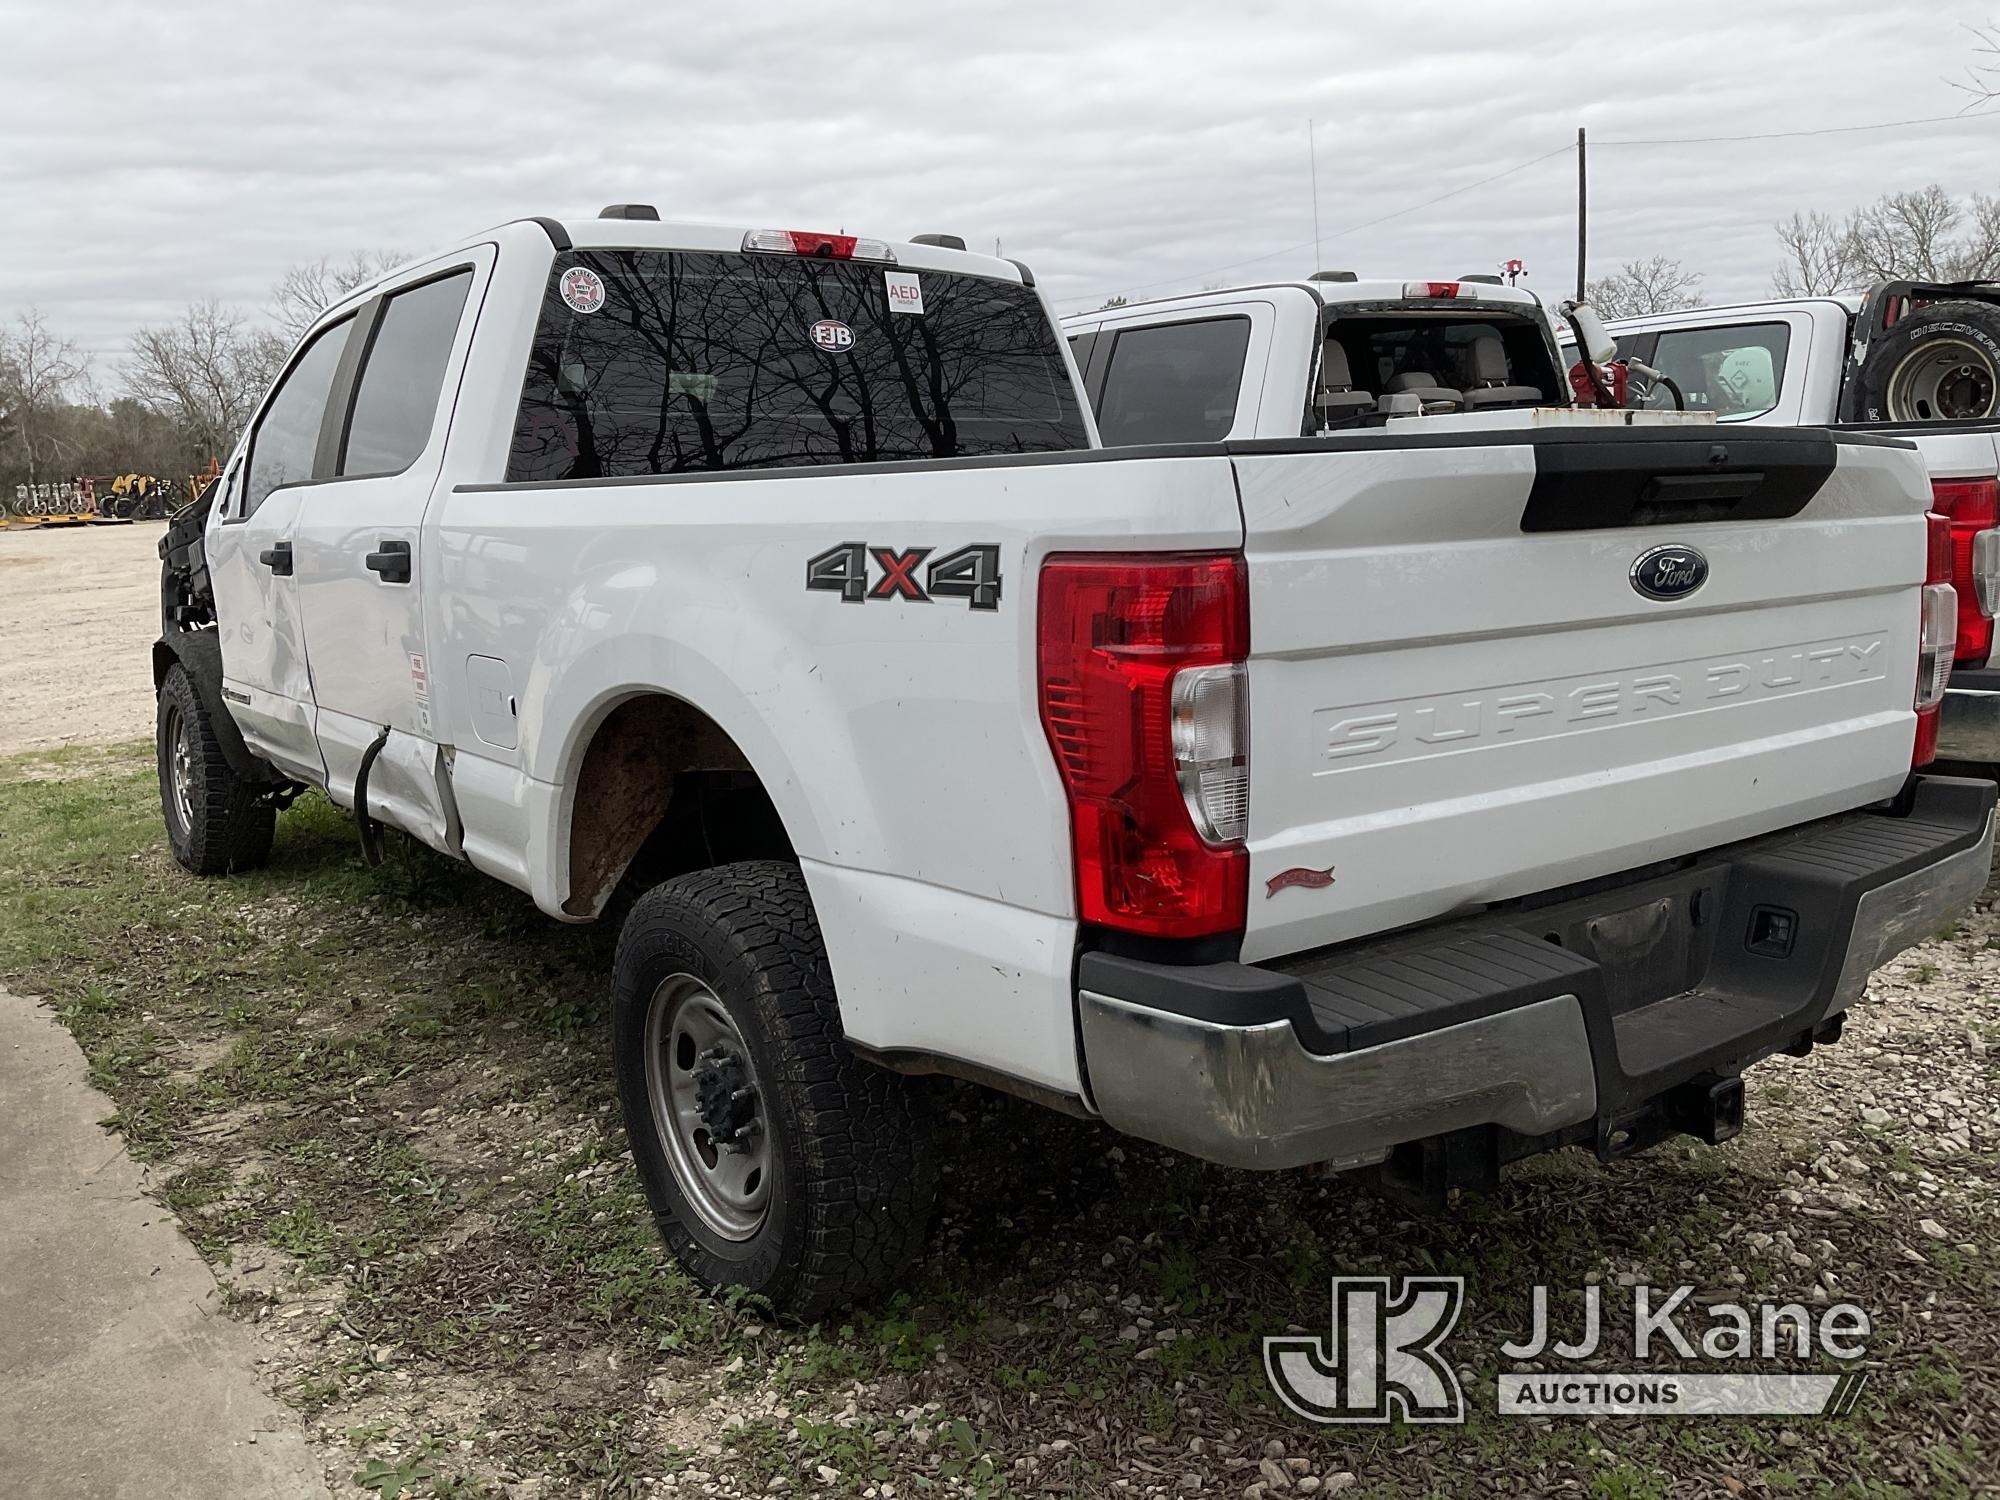 (Alvin, TX) 2020 Ford F250 4x4 Crew-Cab Pickup Truck Wrecked, Does Not Run Or Start, Airbags Deploye